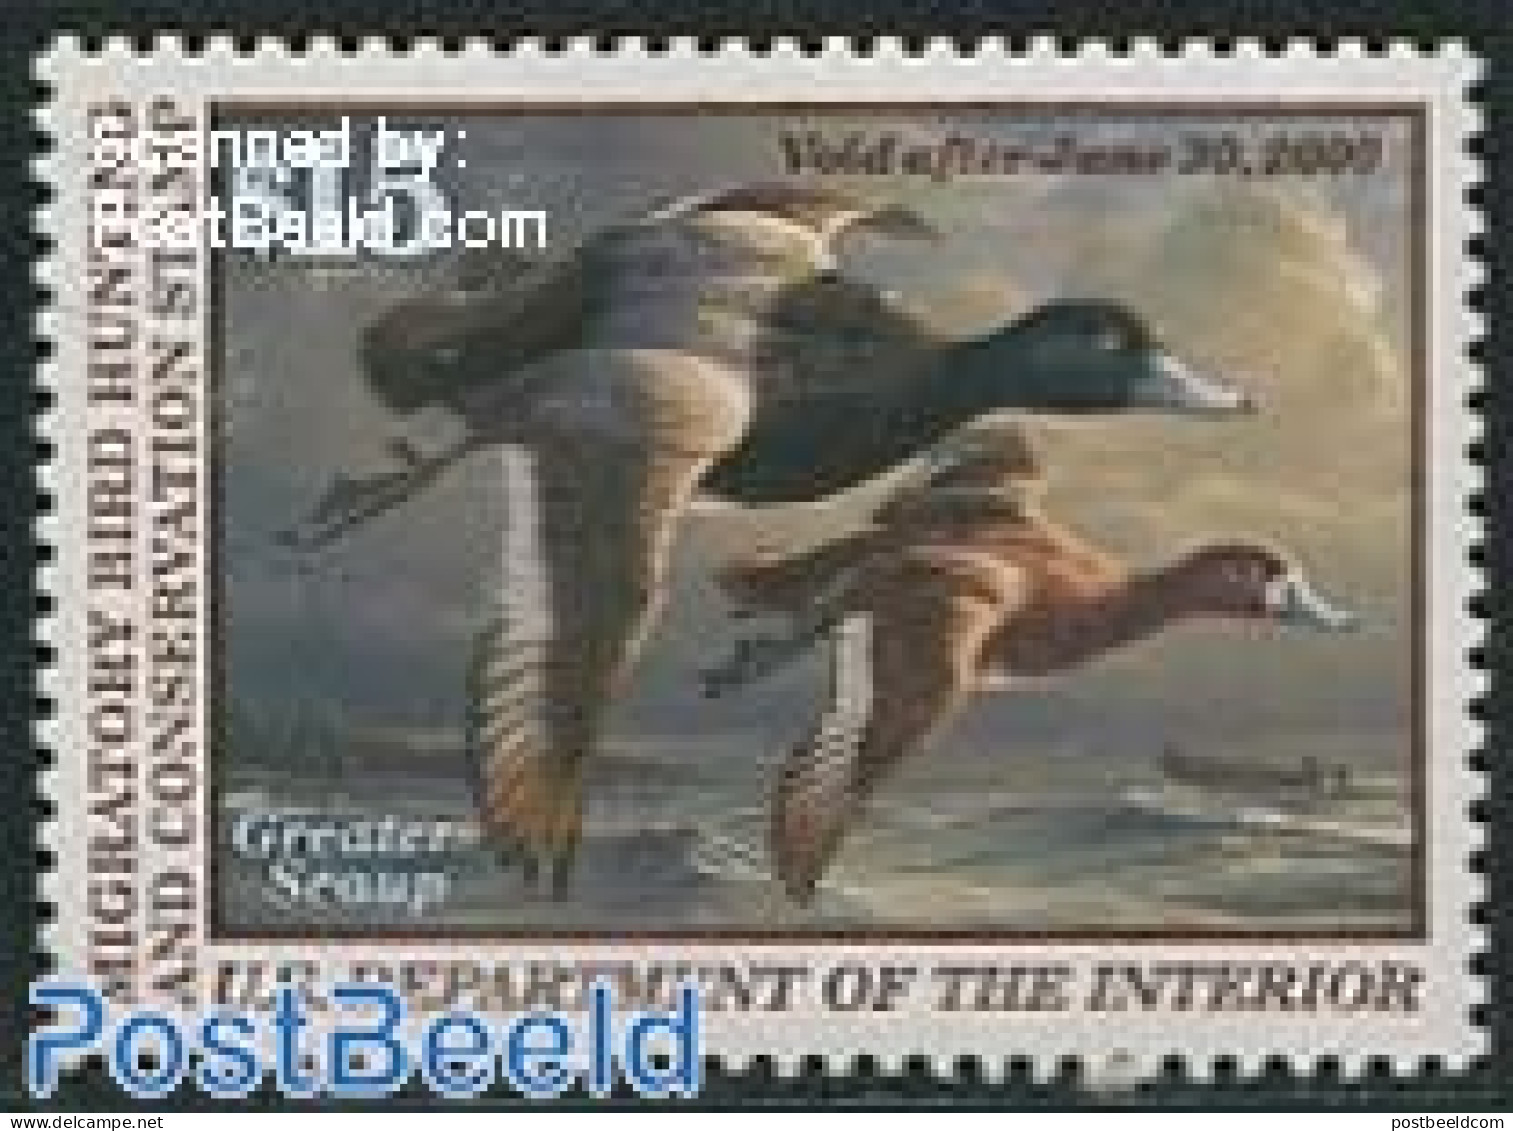 United States Of America 1999 Migratory Bird Hunting Stamp 1v, Greater Scaup, Mint NH, Nature - Birds - Ducks - Hunting - Nuovi